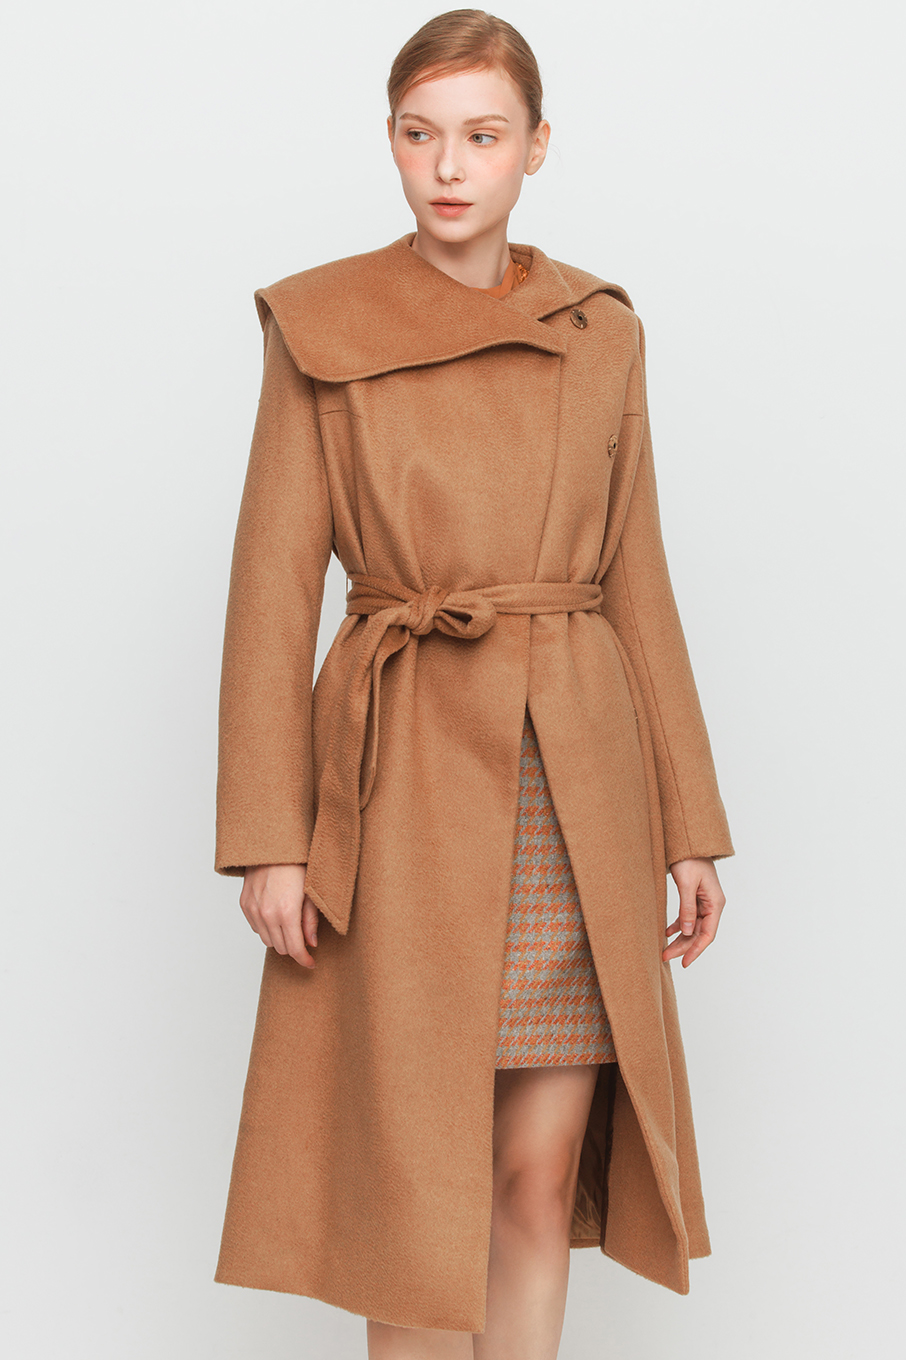 Velen cashemhere coat 3rd small amount and Song Yoon-ah wear it